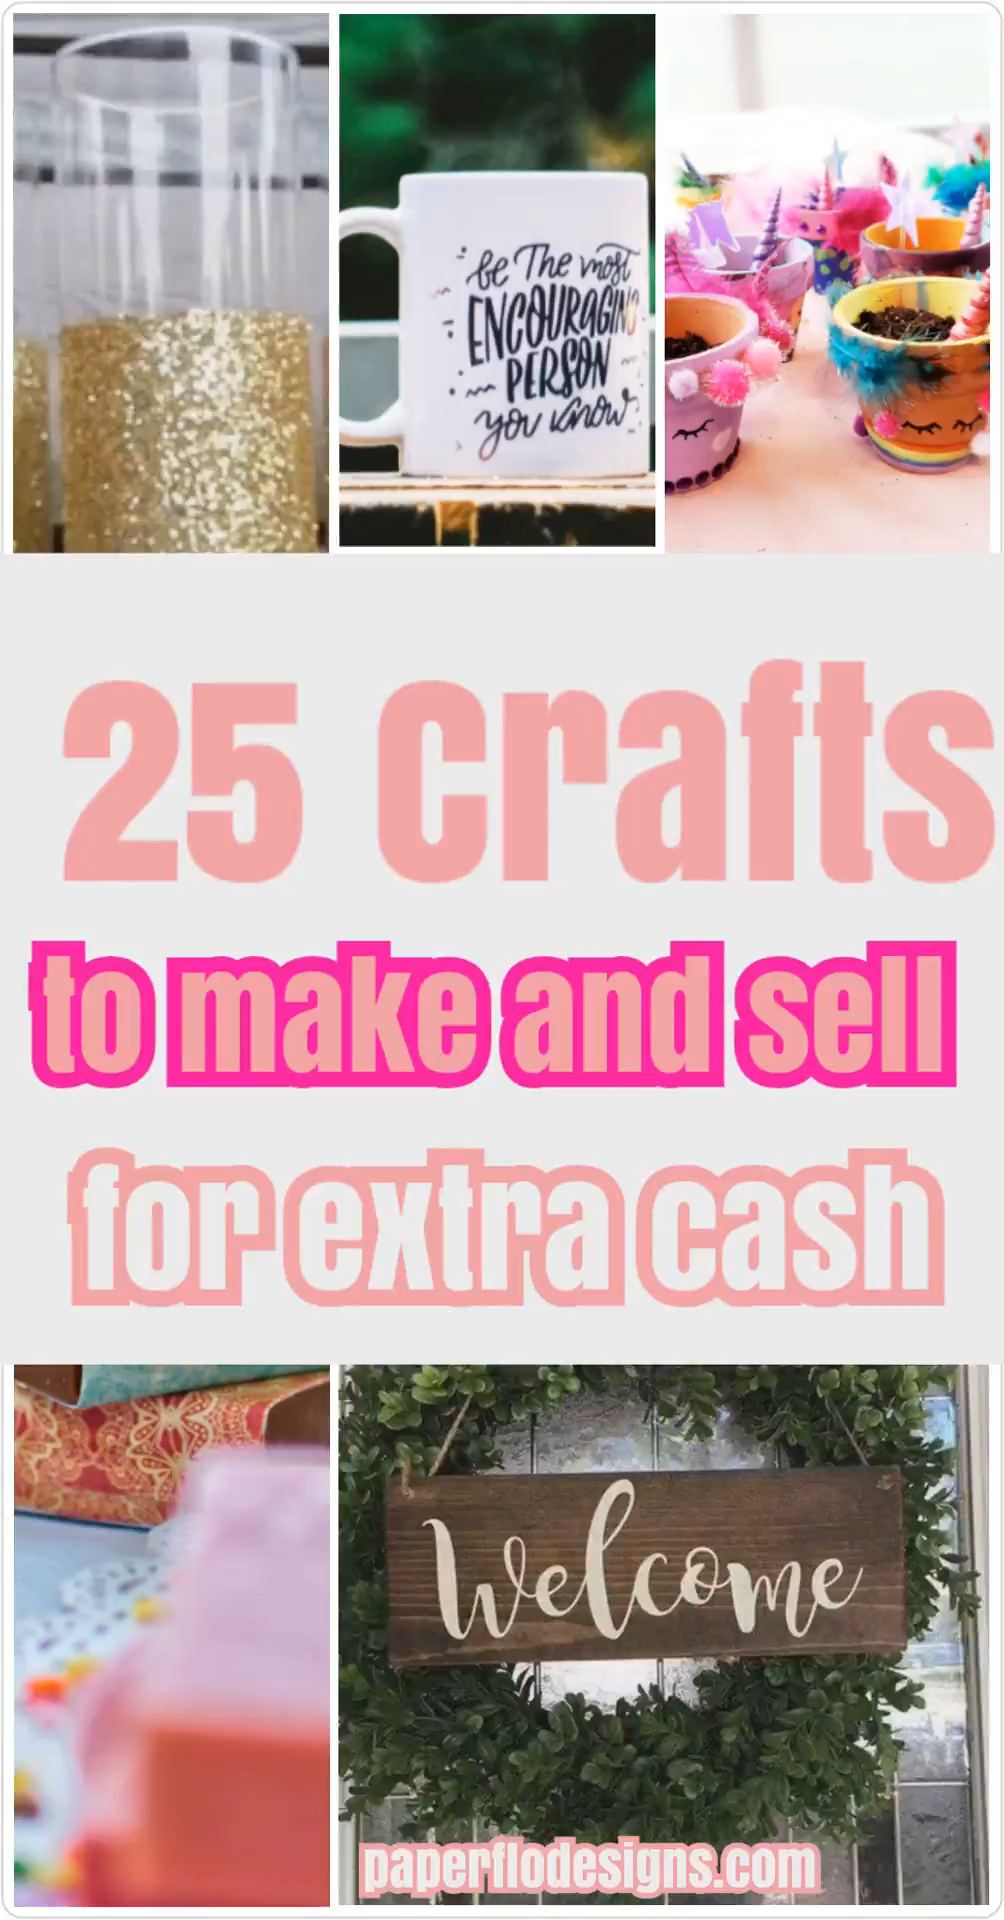 25 Crafts to make and sell for extra cash -   17 diy projects To Make Money baking soda ideas